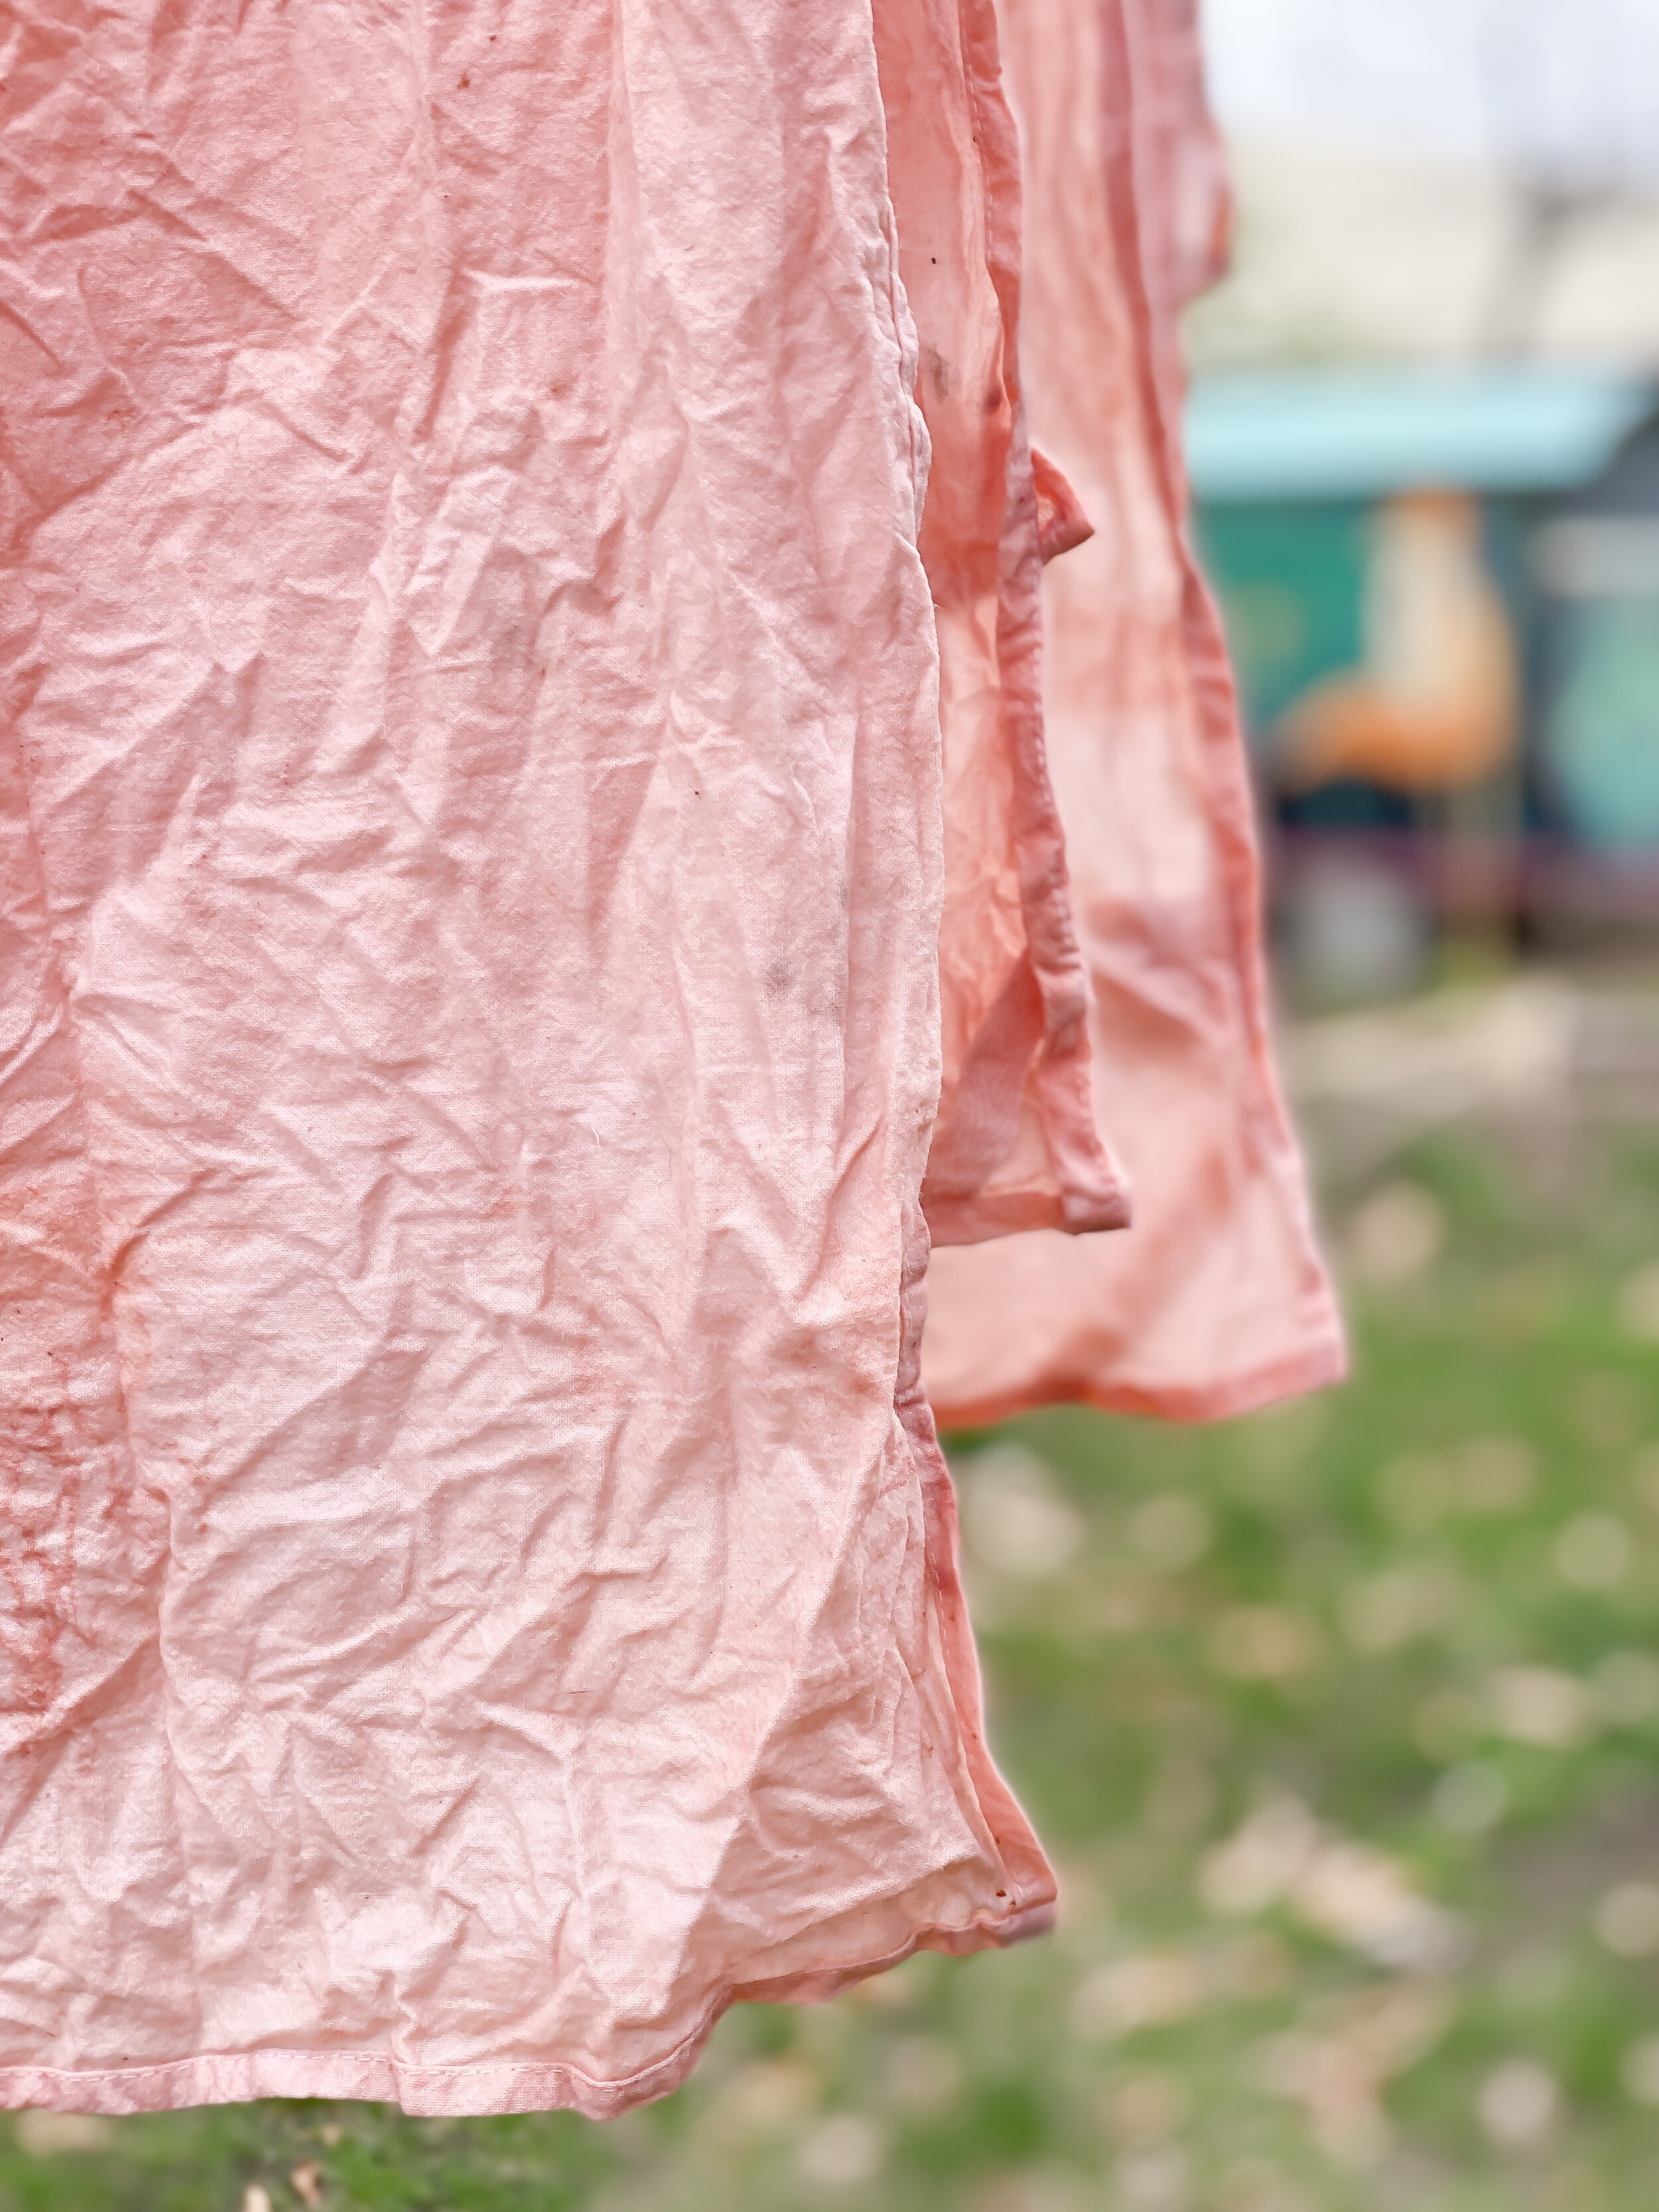 Here's How To Turn Your Avocado Trash Into Millennial Pink Fabric Dye